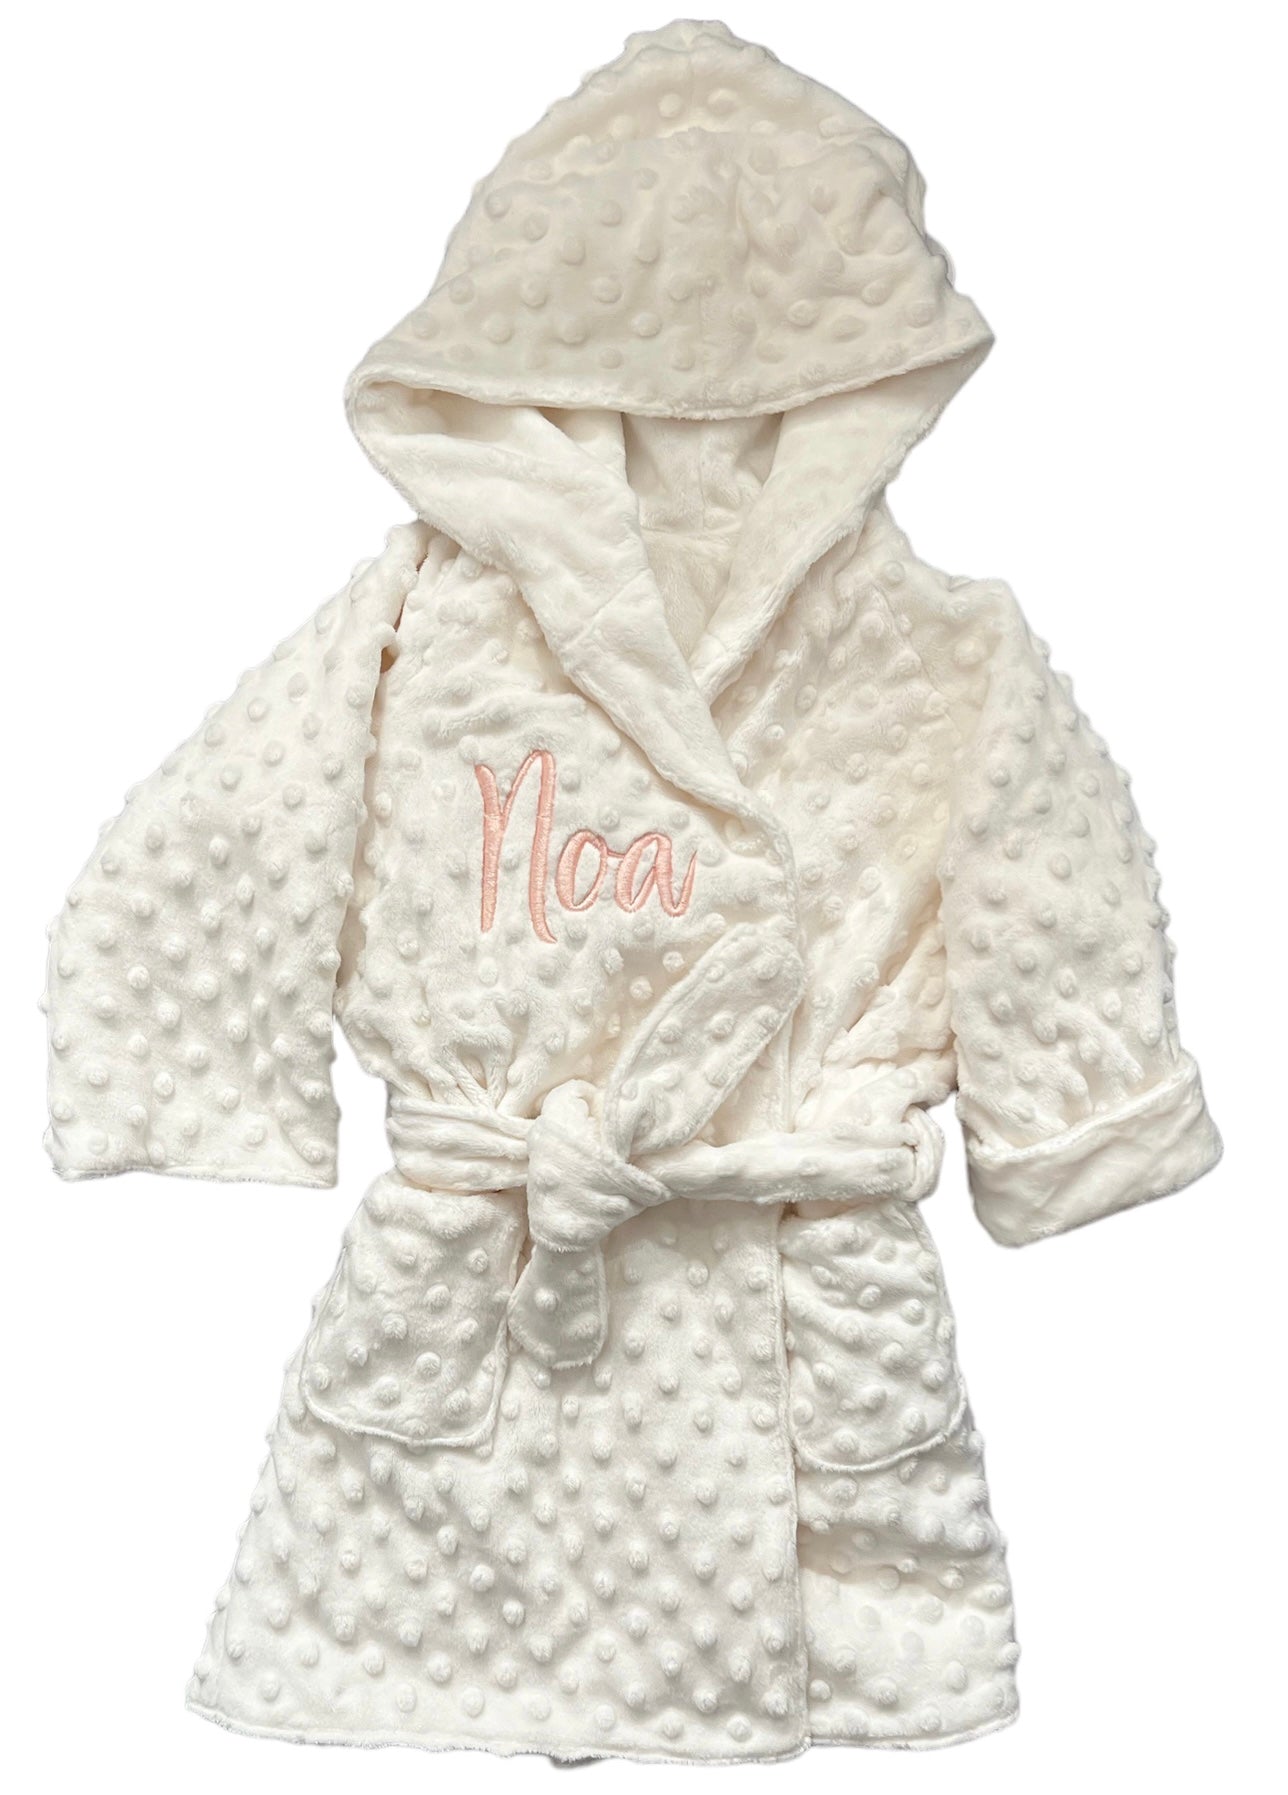 Personalized Dimple Hooded Bathrobe